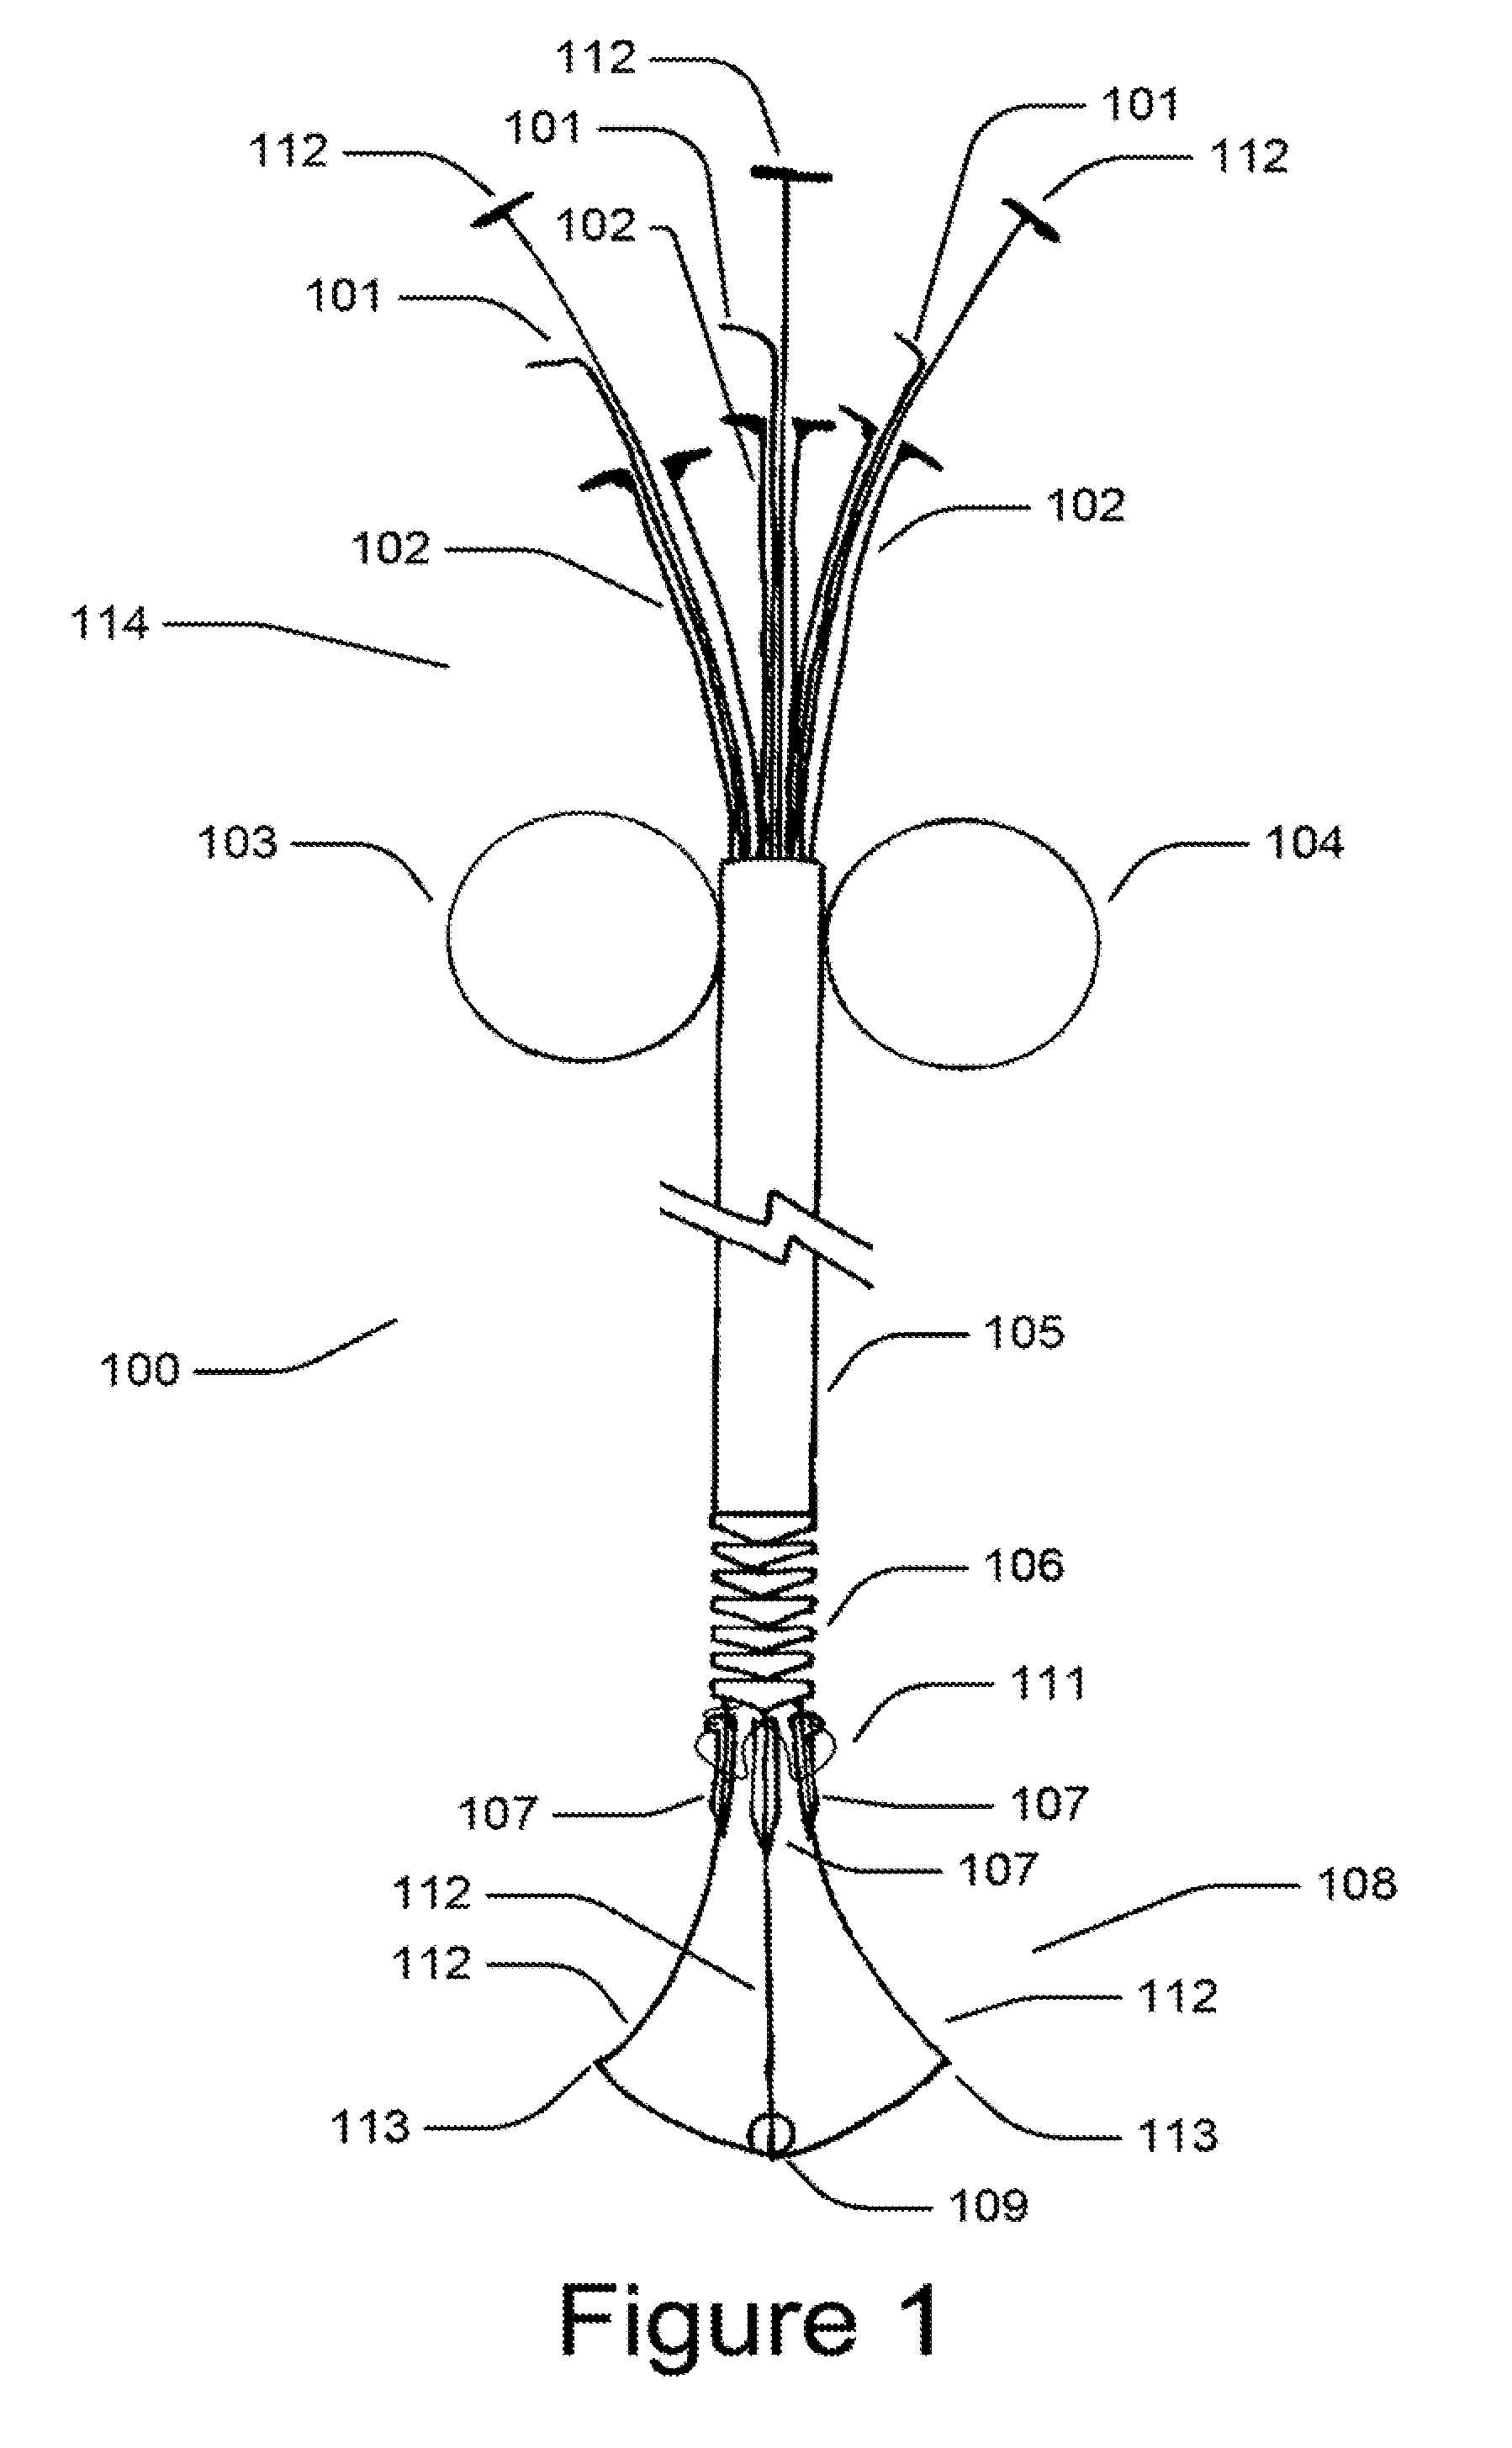 Medical device for constricting tissue or a bodily orifice, for example a mitral valve